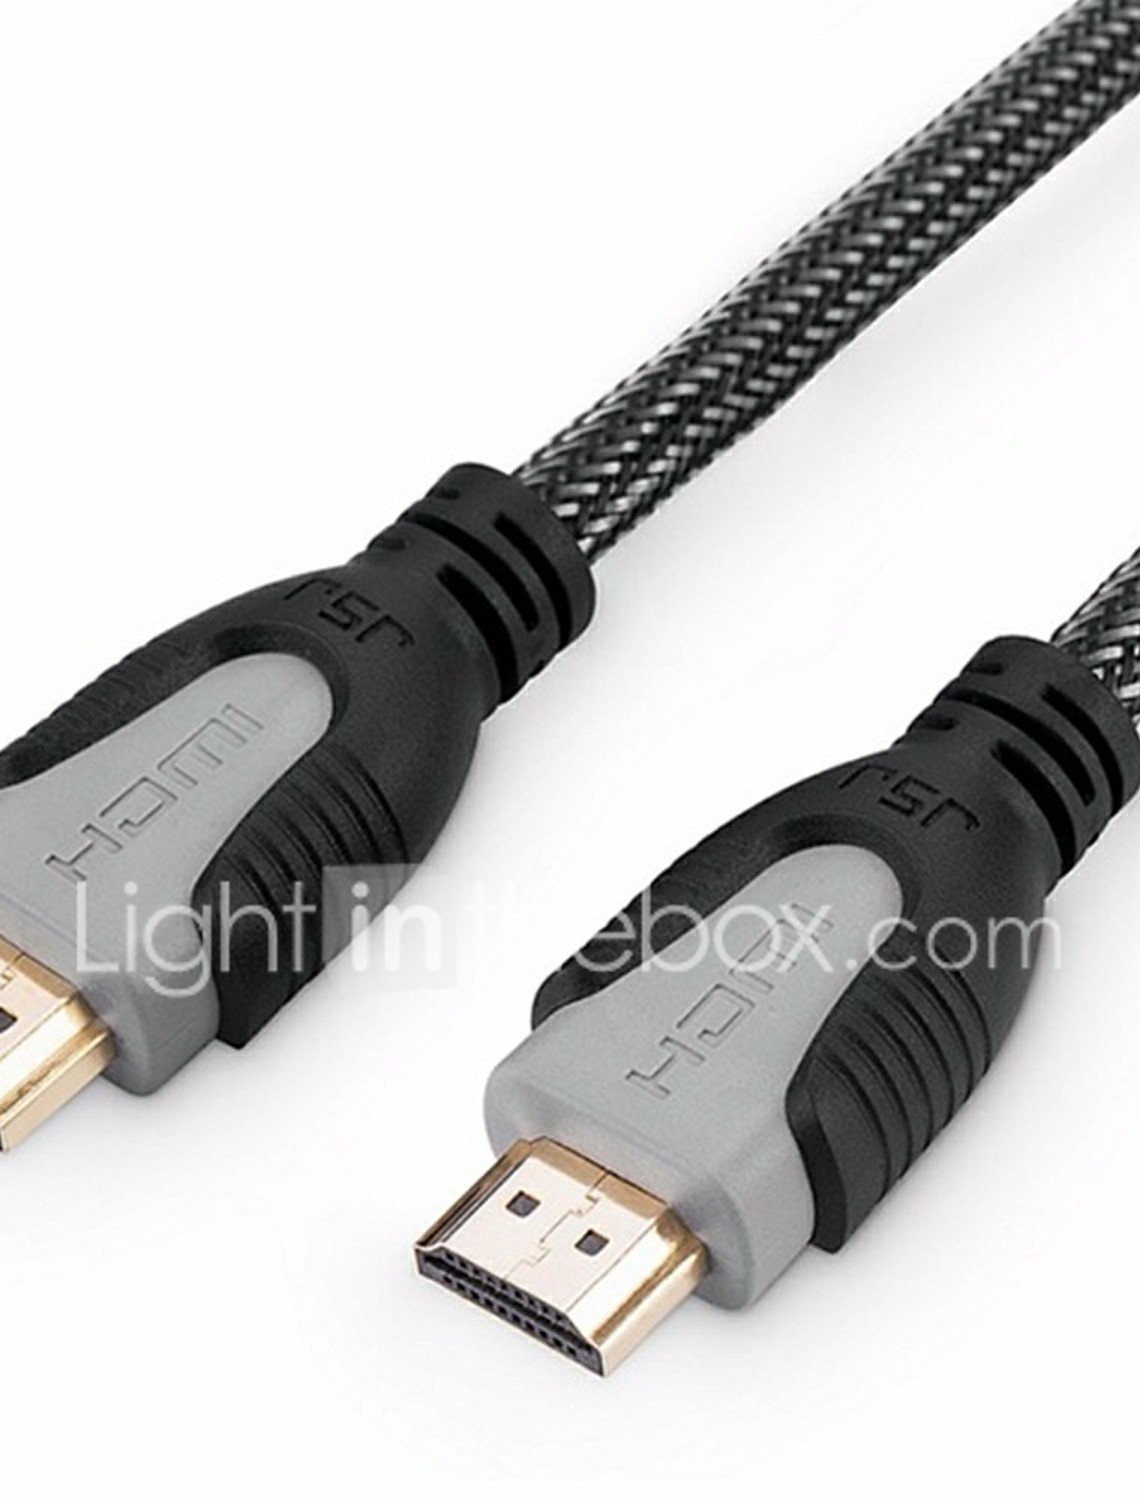 HDMI CABLE 1.4V COPPER GOLD PLATED BLACK AND WHITE UK